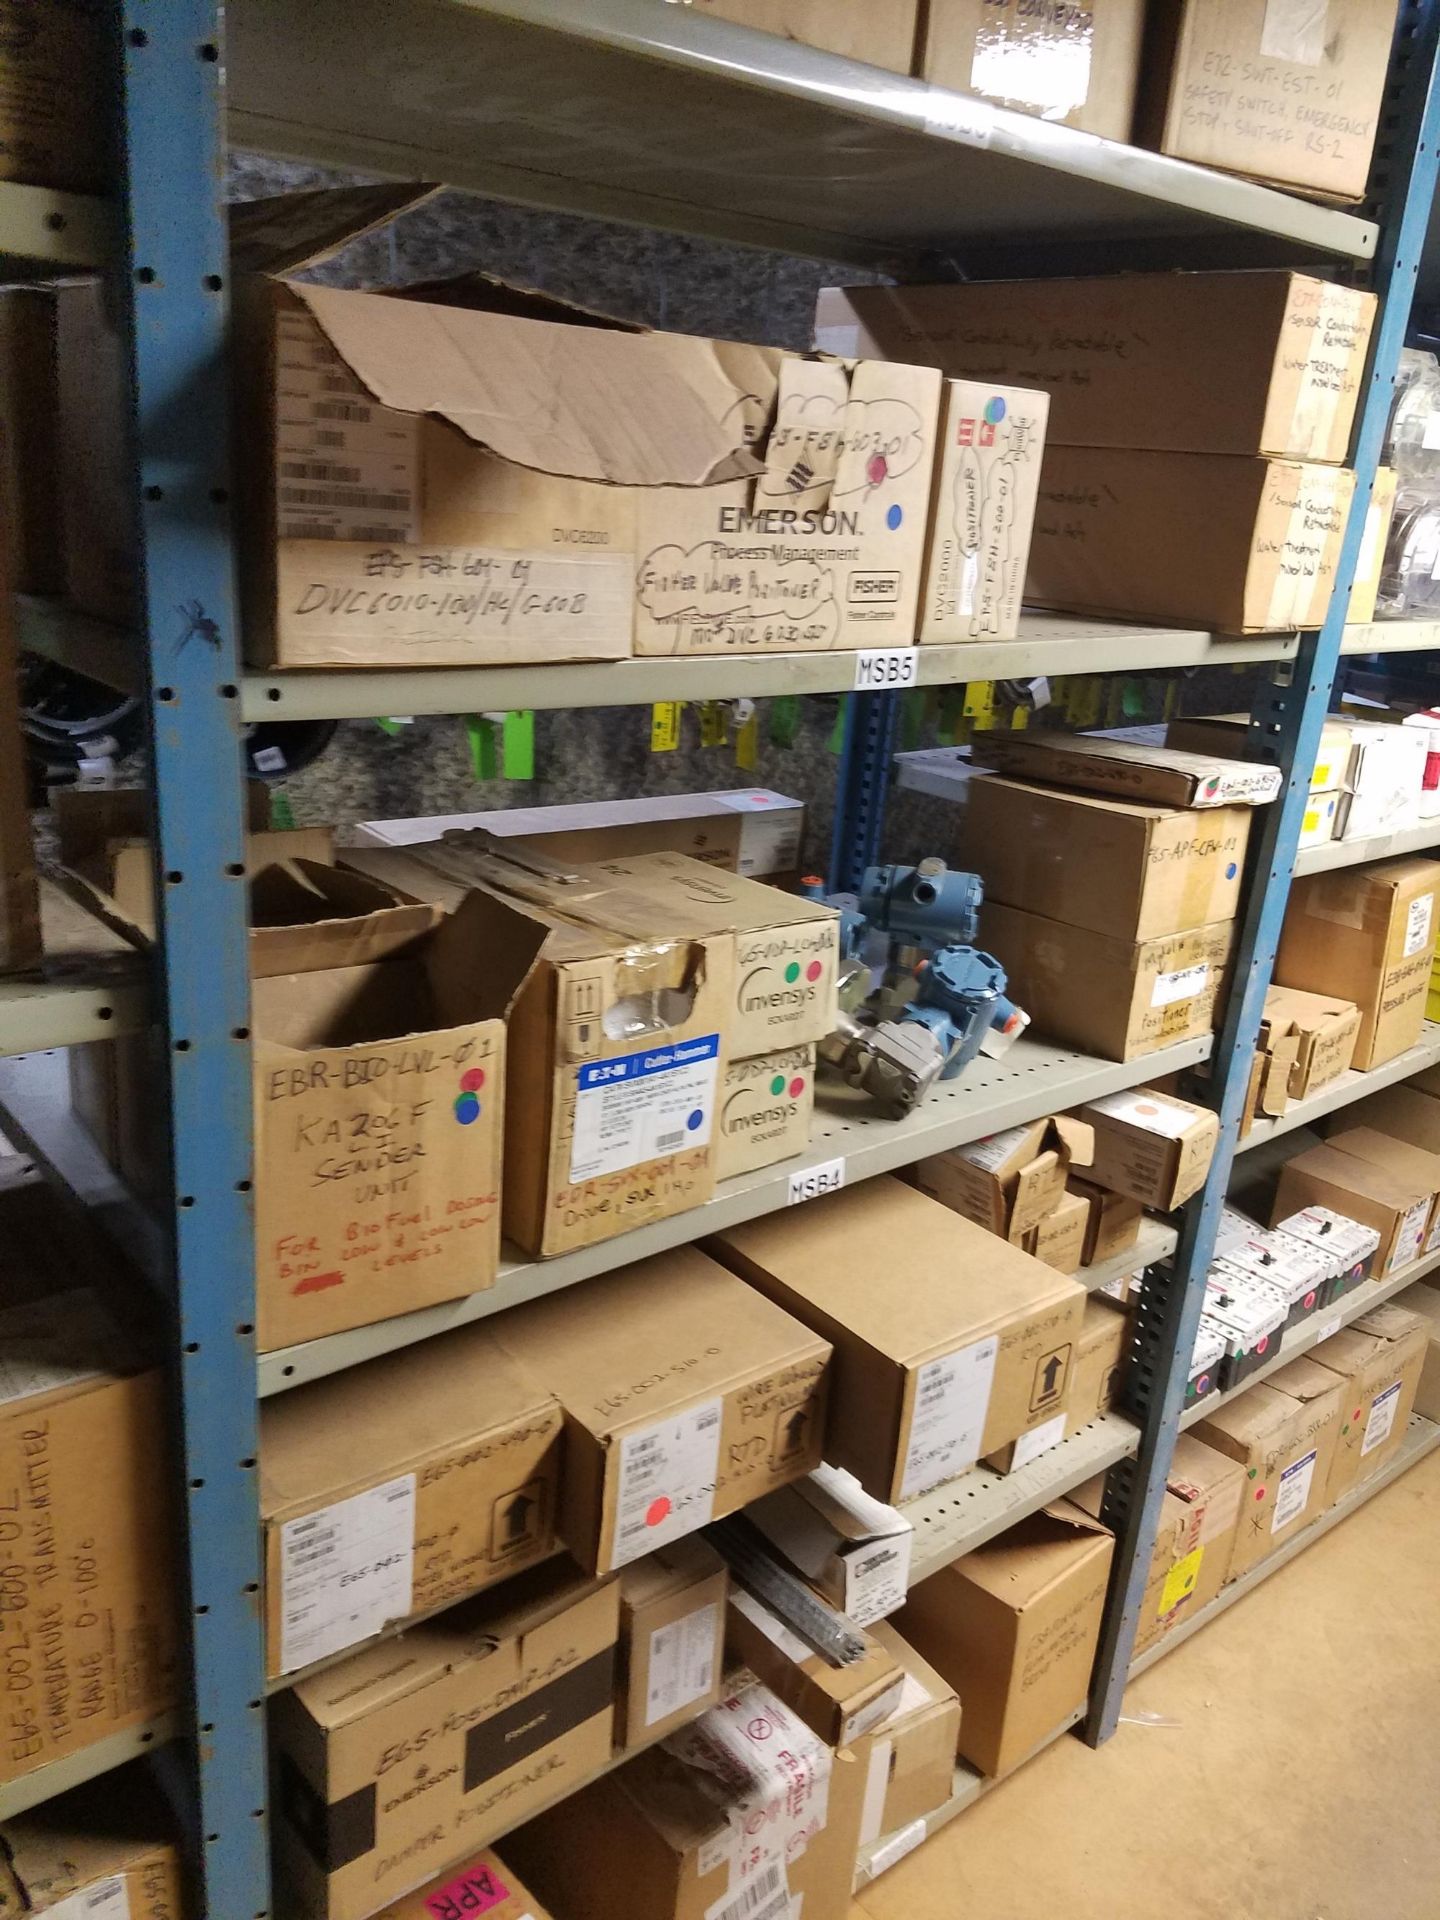 Contents of Spare Parts Storage Area On Mezzanine | Rig Fee: $400 - Image 18 of 19